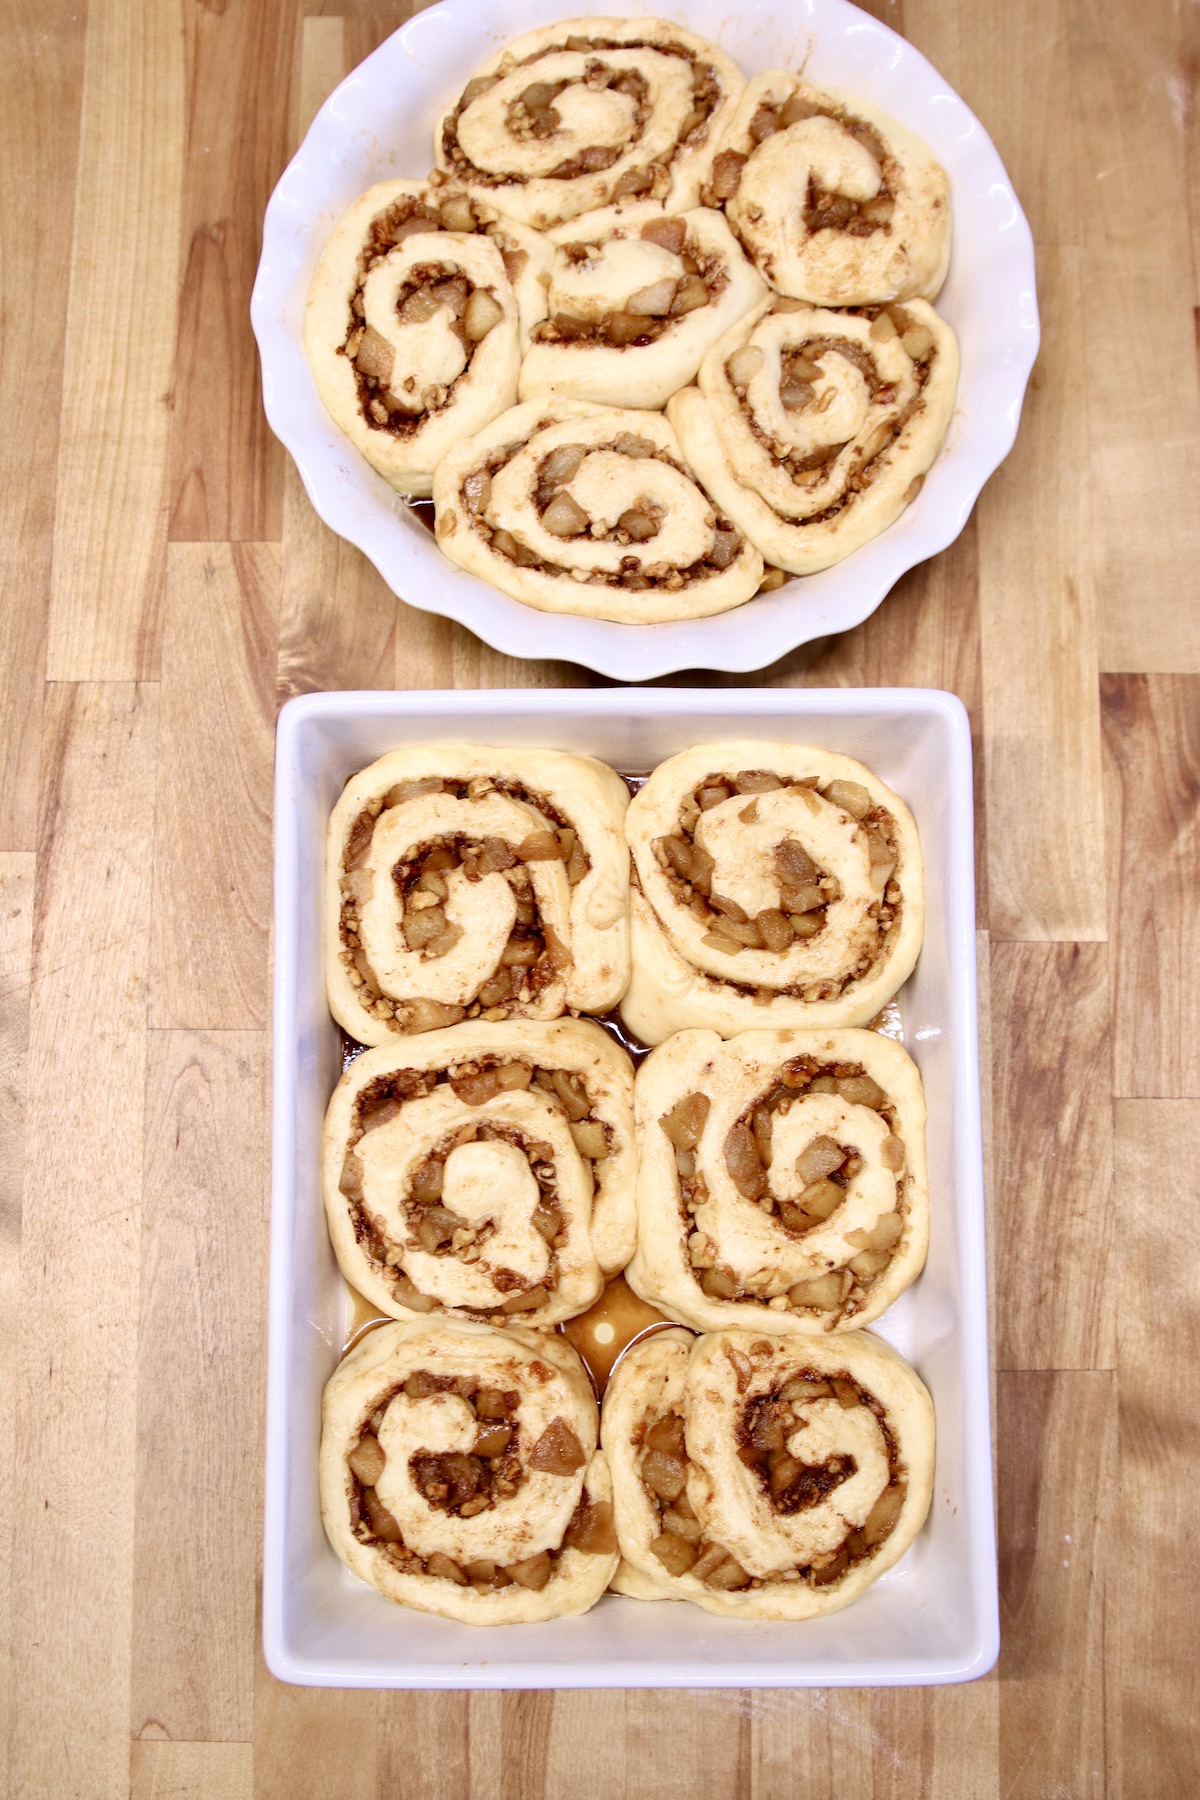 cinnamon rolls in a pie plate and baking dish - not baked